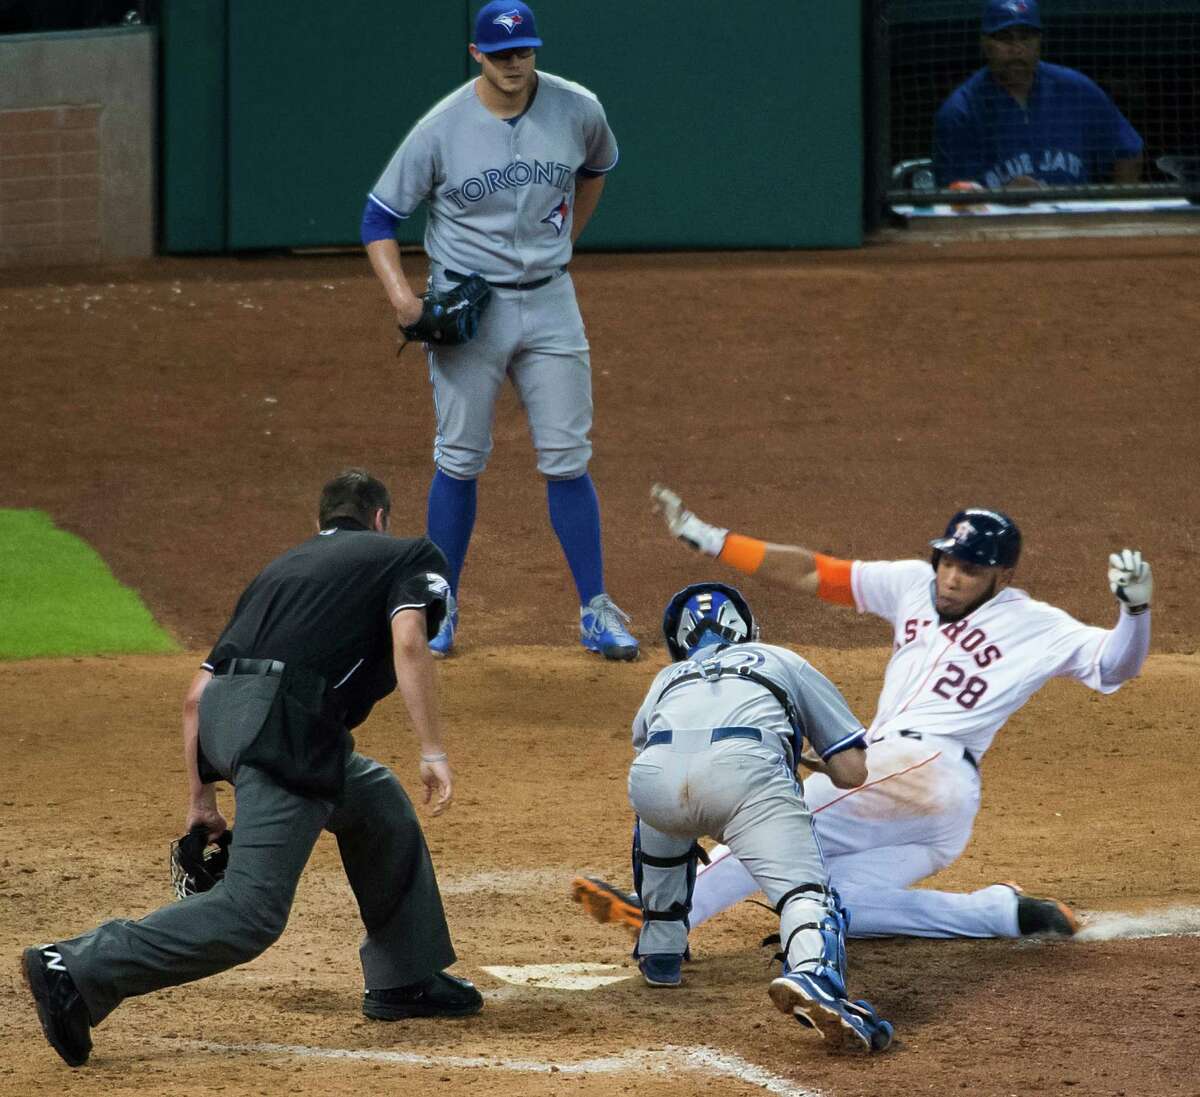 He originally was ruled out, but a review of the play showed that Astros first baseman Jon Singleton slid under the tag of Blue Jays catcher Josh Thole to complete an inside-the-park home run in the eighth inning.